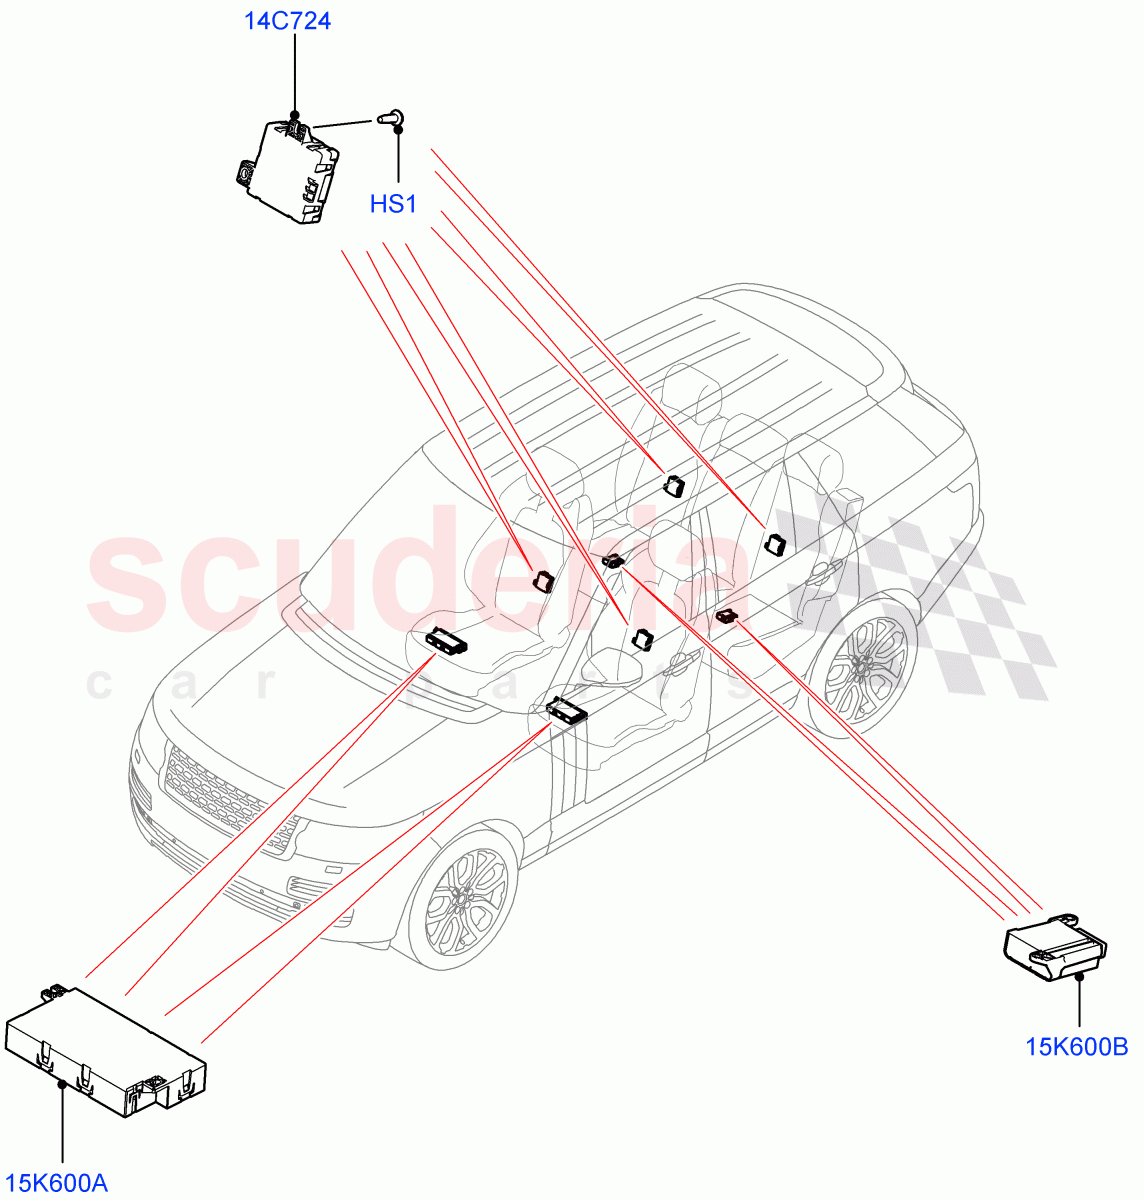 Vehicle Modules And Sensors(Seats)((V)FROMJA000001) of Land Rover Land Rover Range Rover (2012-2021) [2.0 Turbo Petrol GTDI]